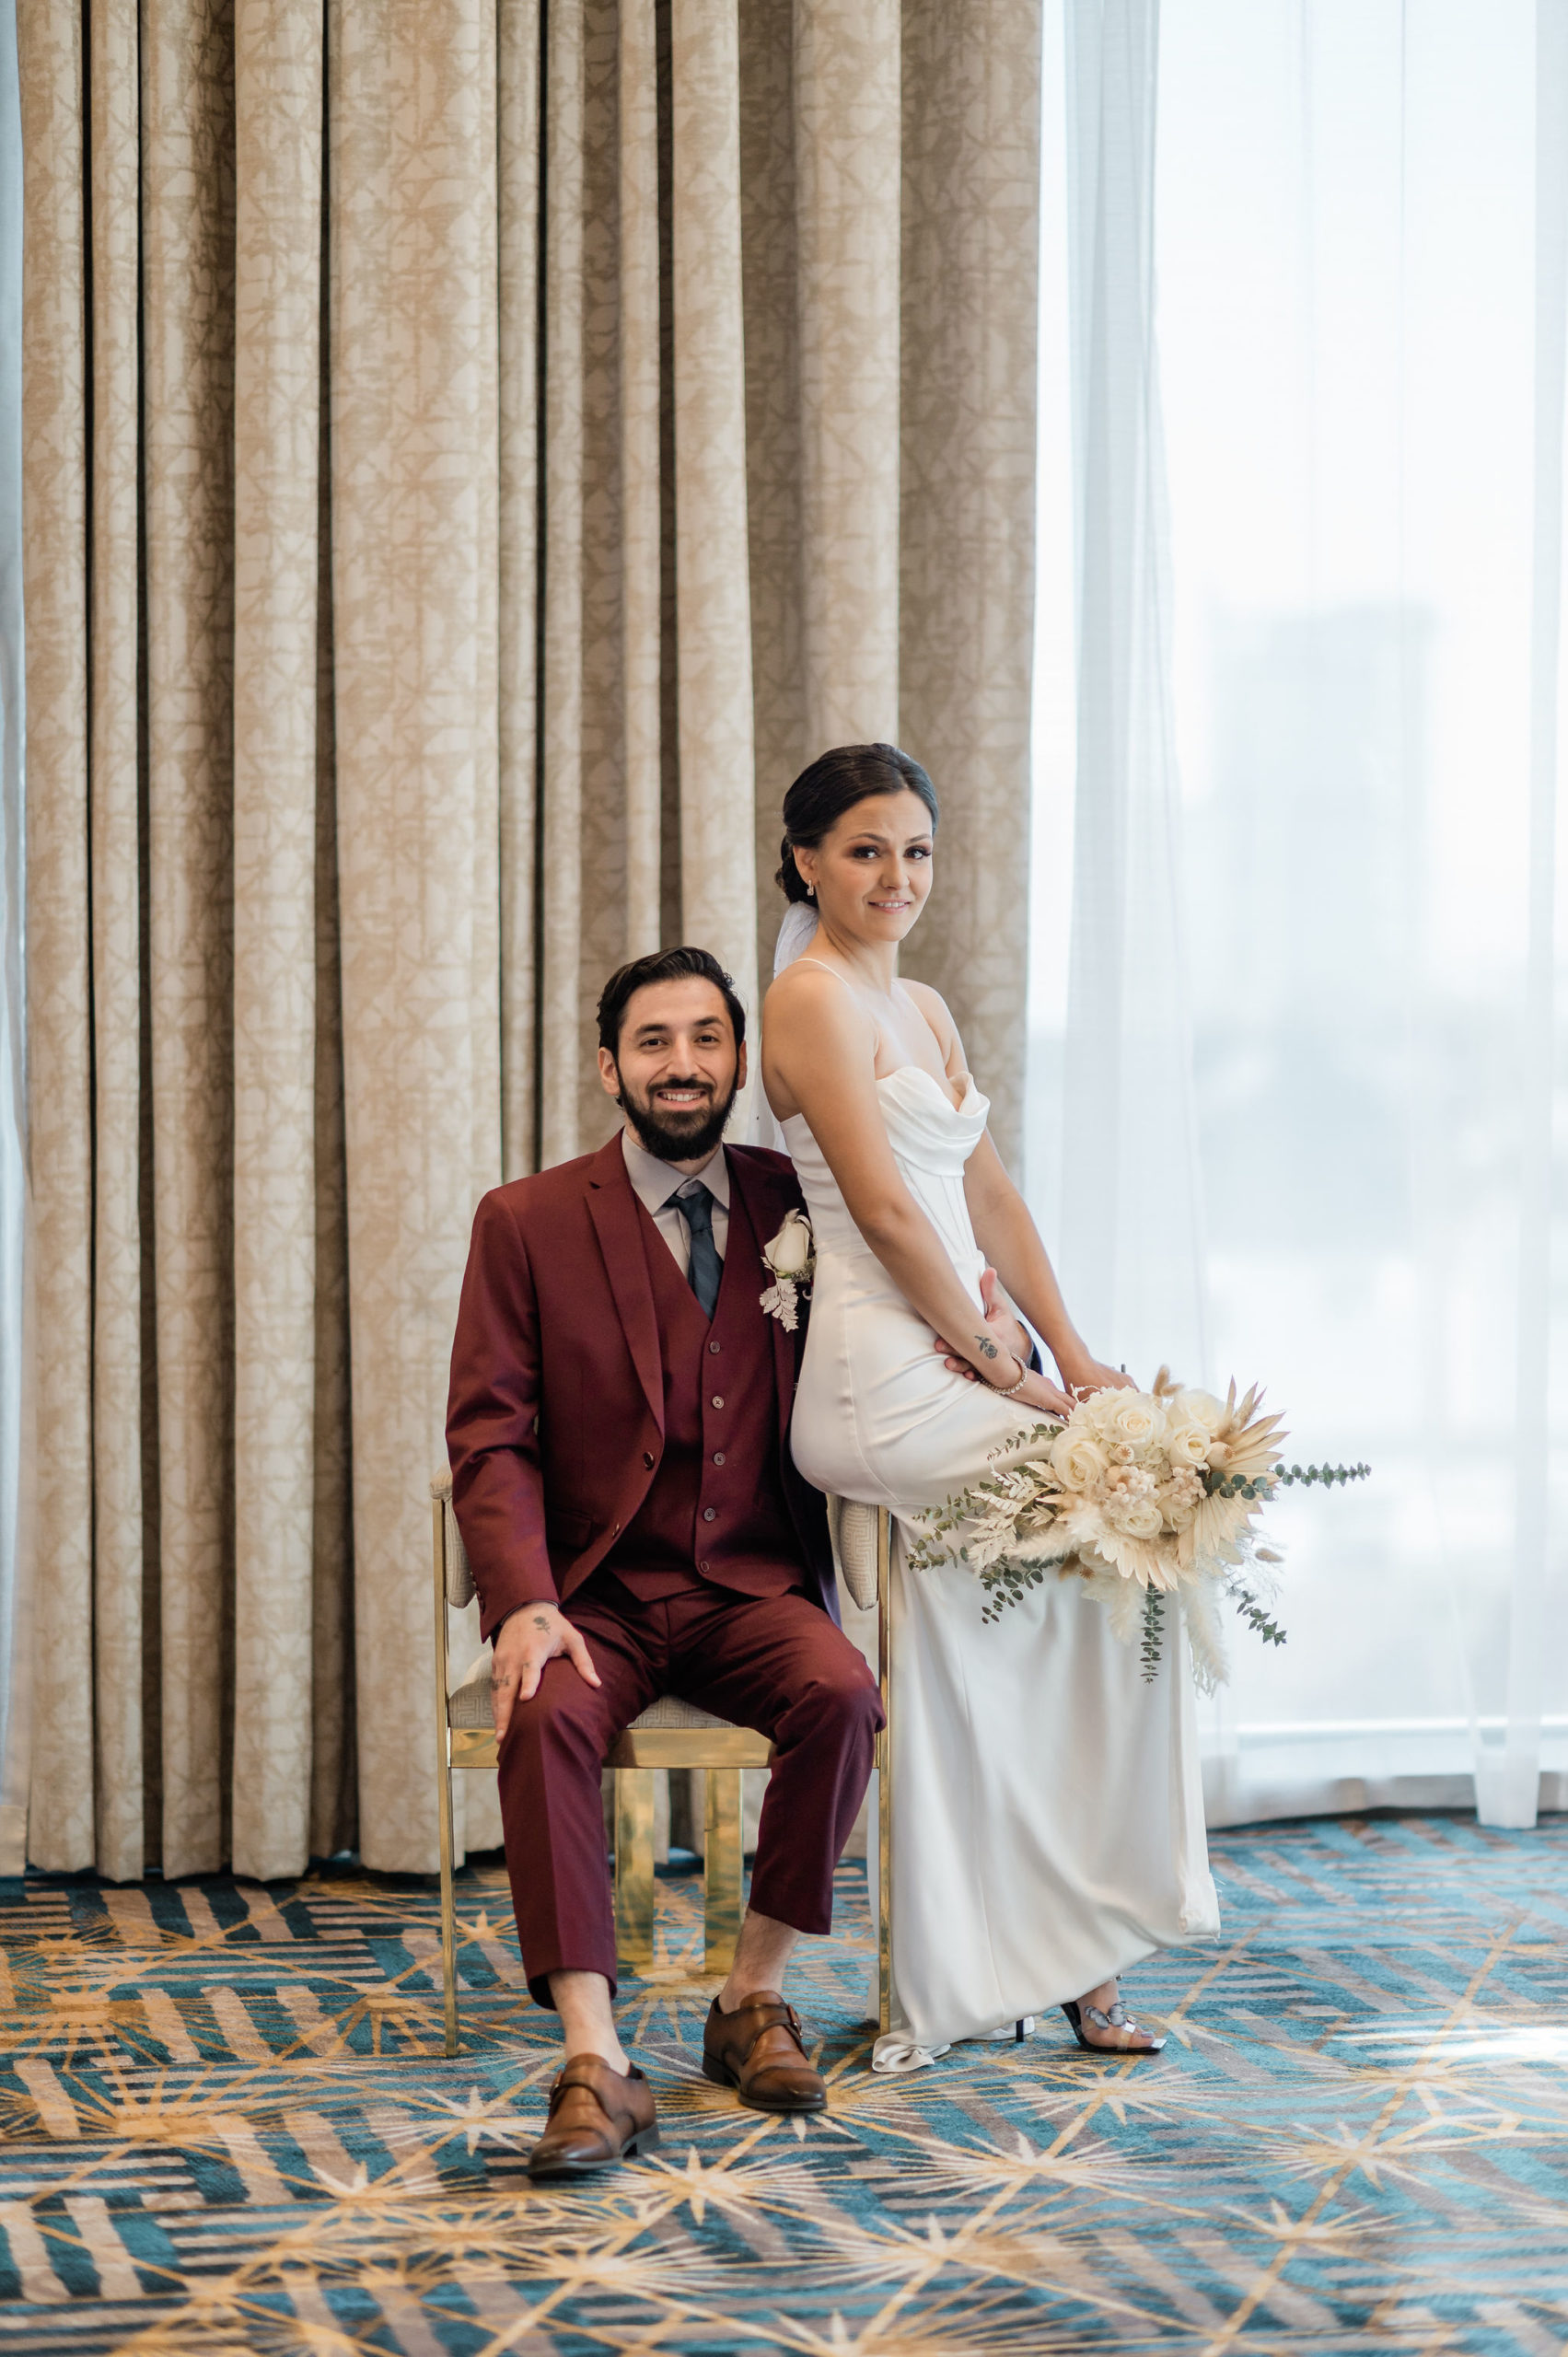 Couple posing as they sit on a chair during their Las Vegas wedding arranged by Elopement Las Vegas